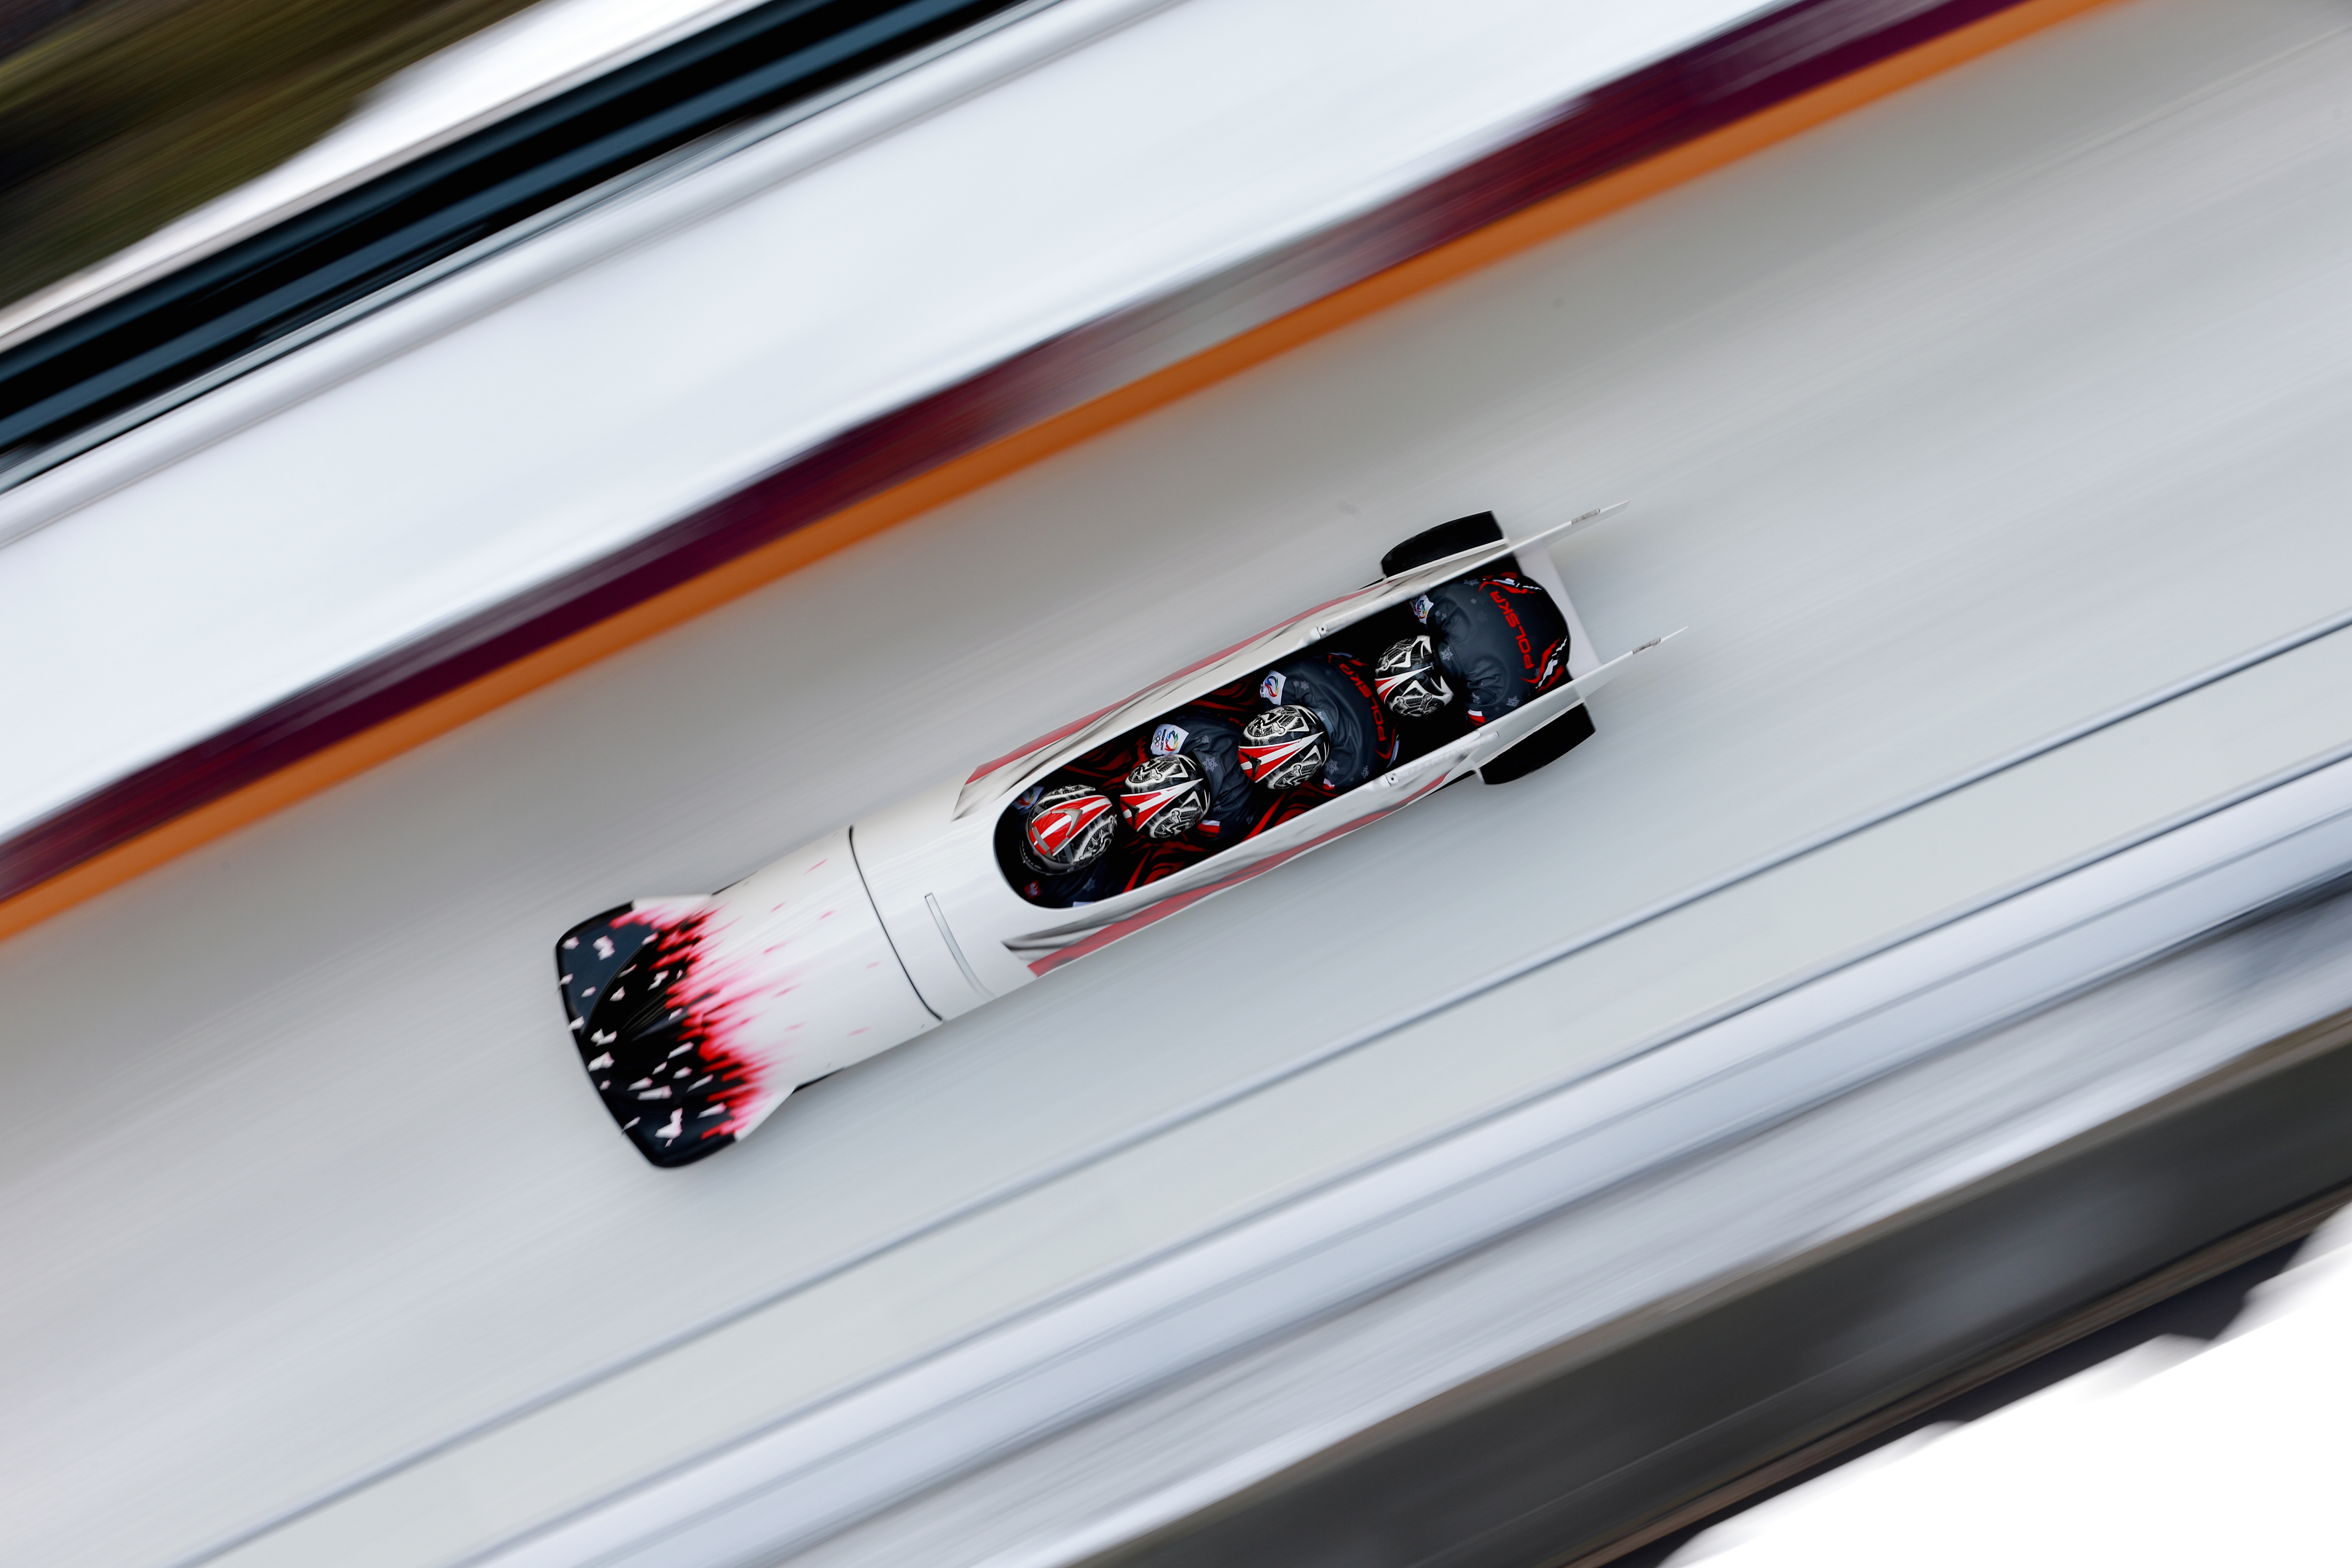 Dawid Kupczyk drives Poland's bobsled during Bobsleigh training.